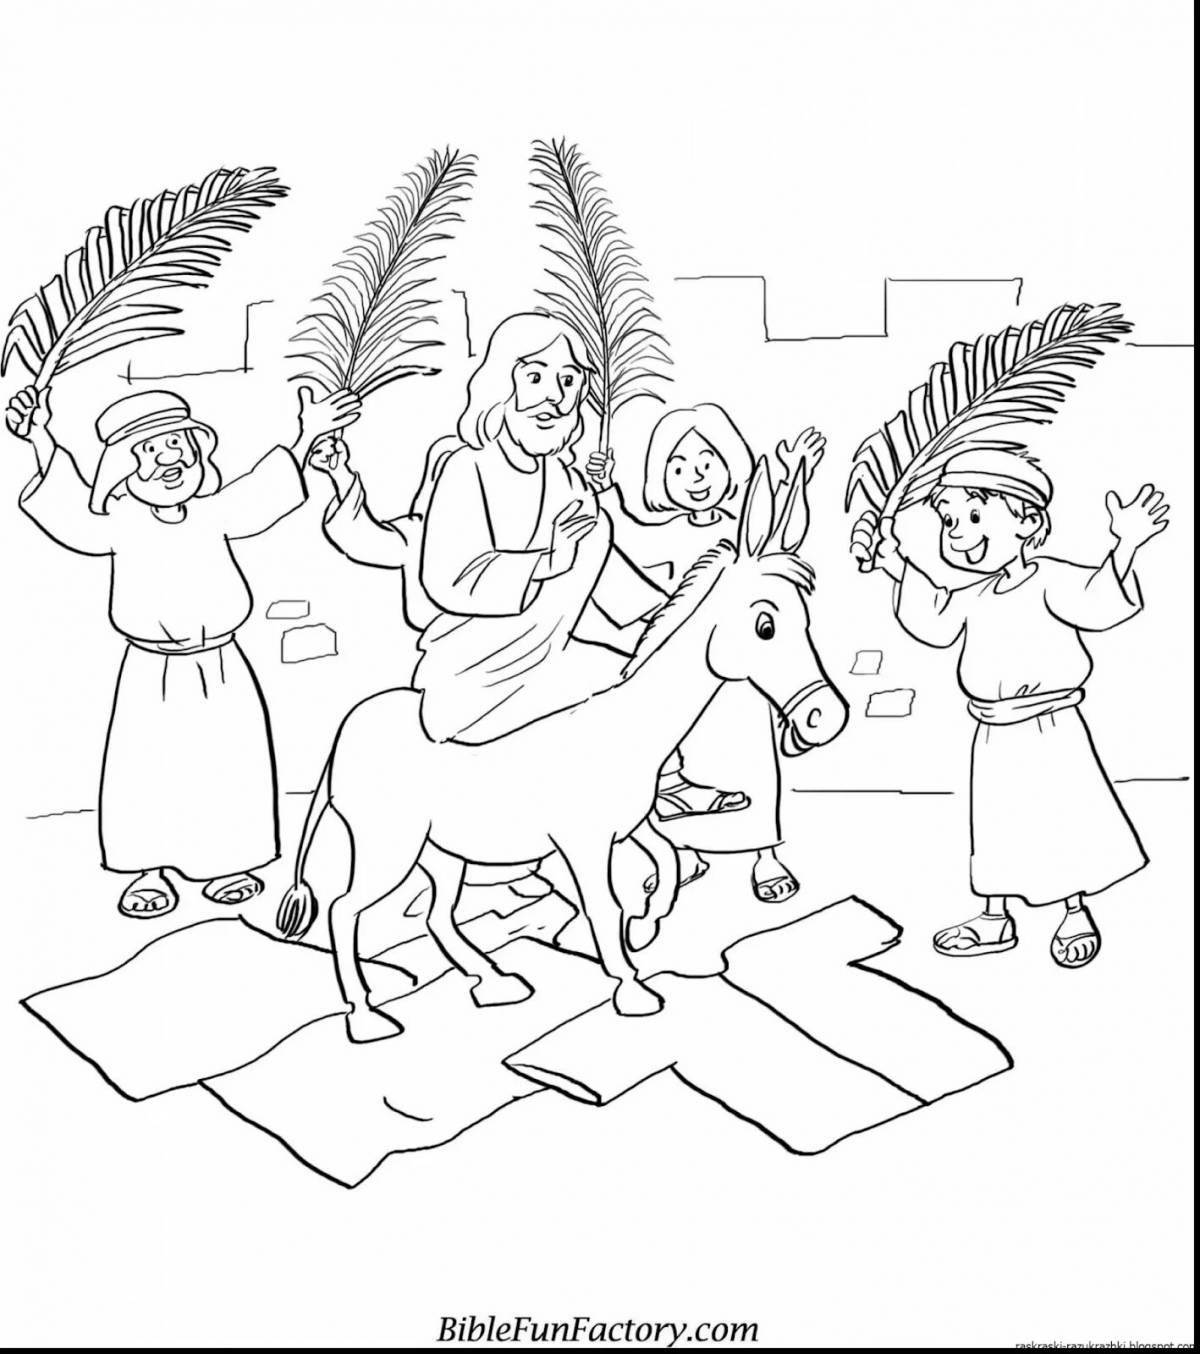 Christian coloring page